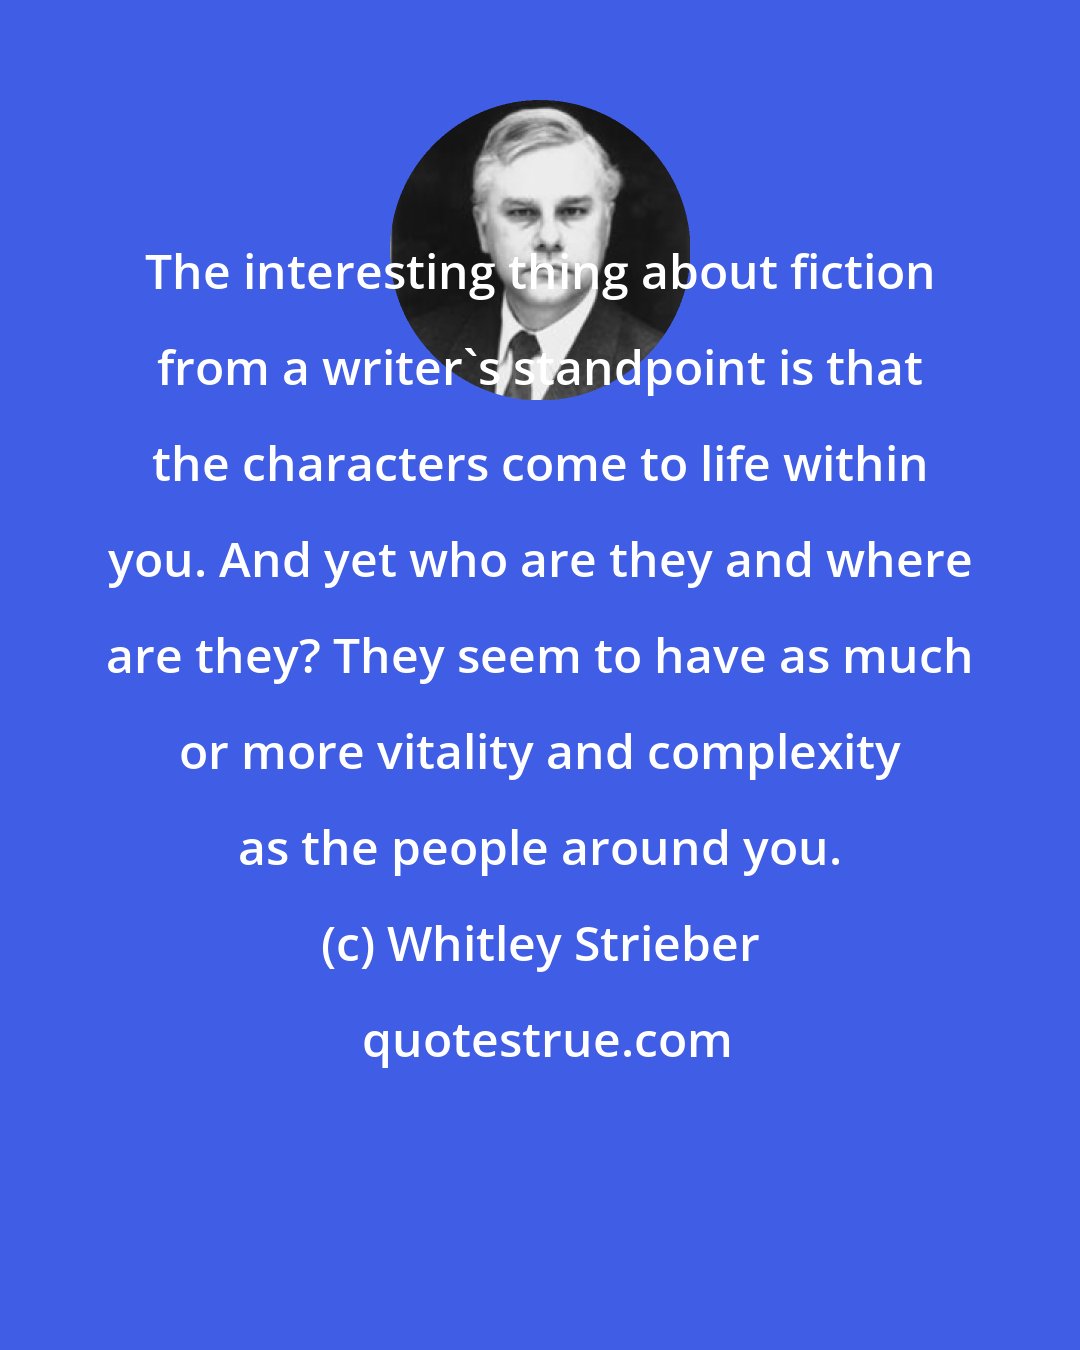 Whitley Strieber: The interesting thing about fiction from a writer's standpoint is that the characters come to life within you. And yet who are they and where are they? They seem to have as much or more vitality and complexity as the people around you.